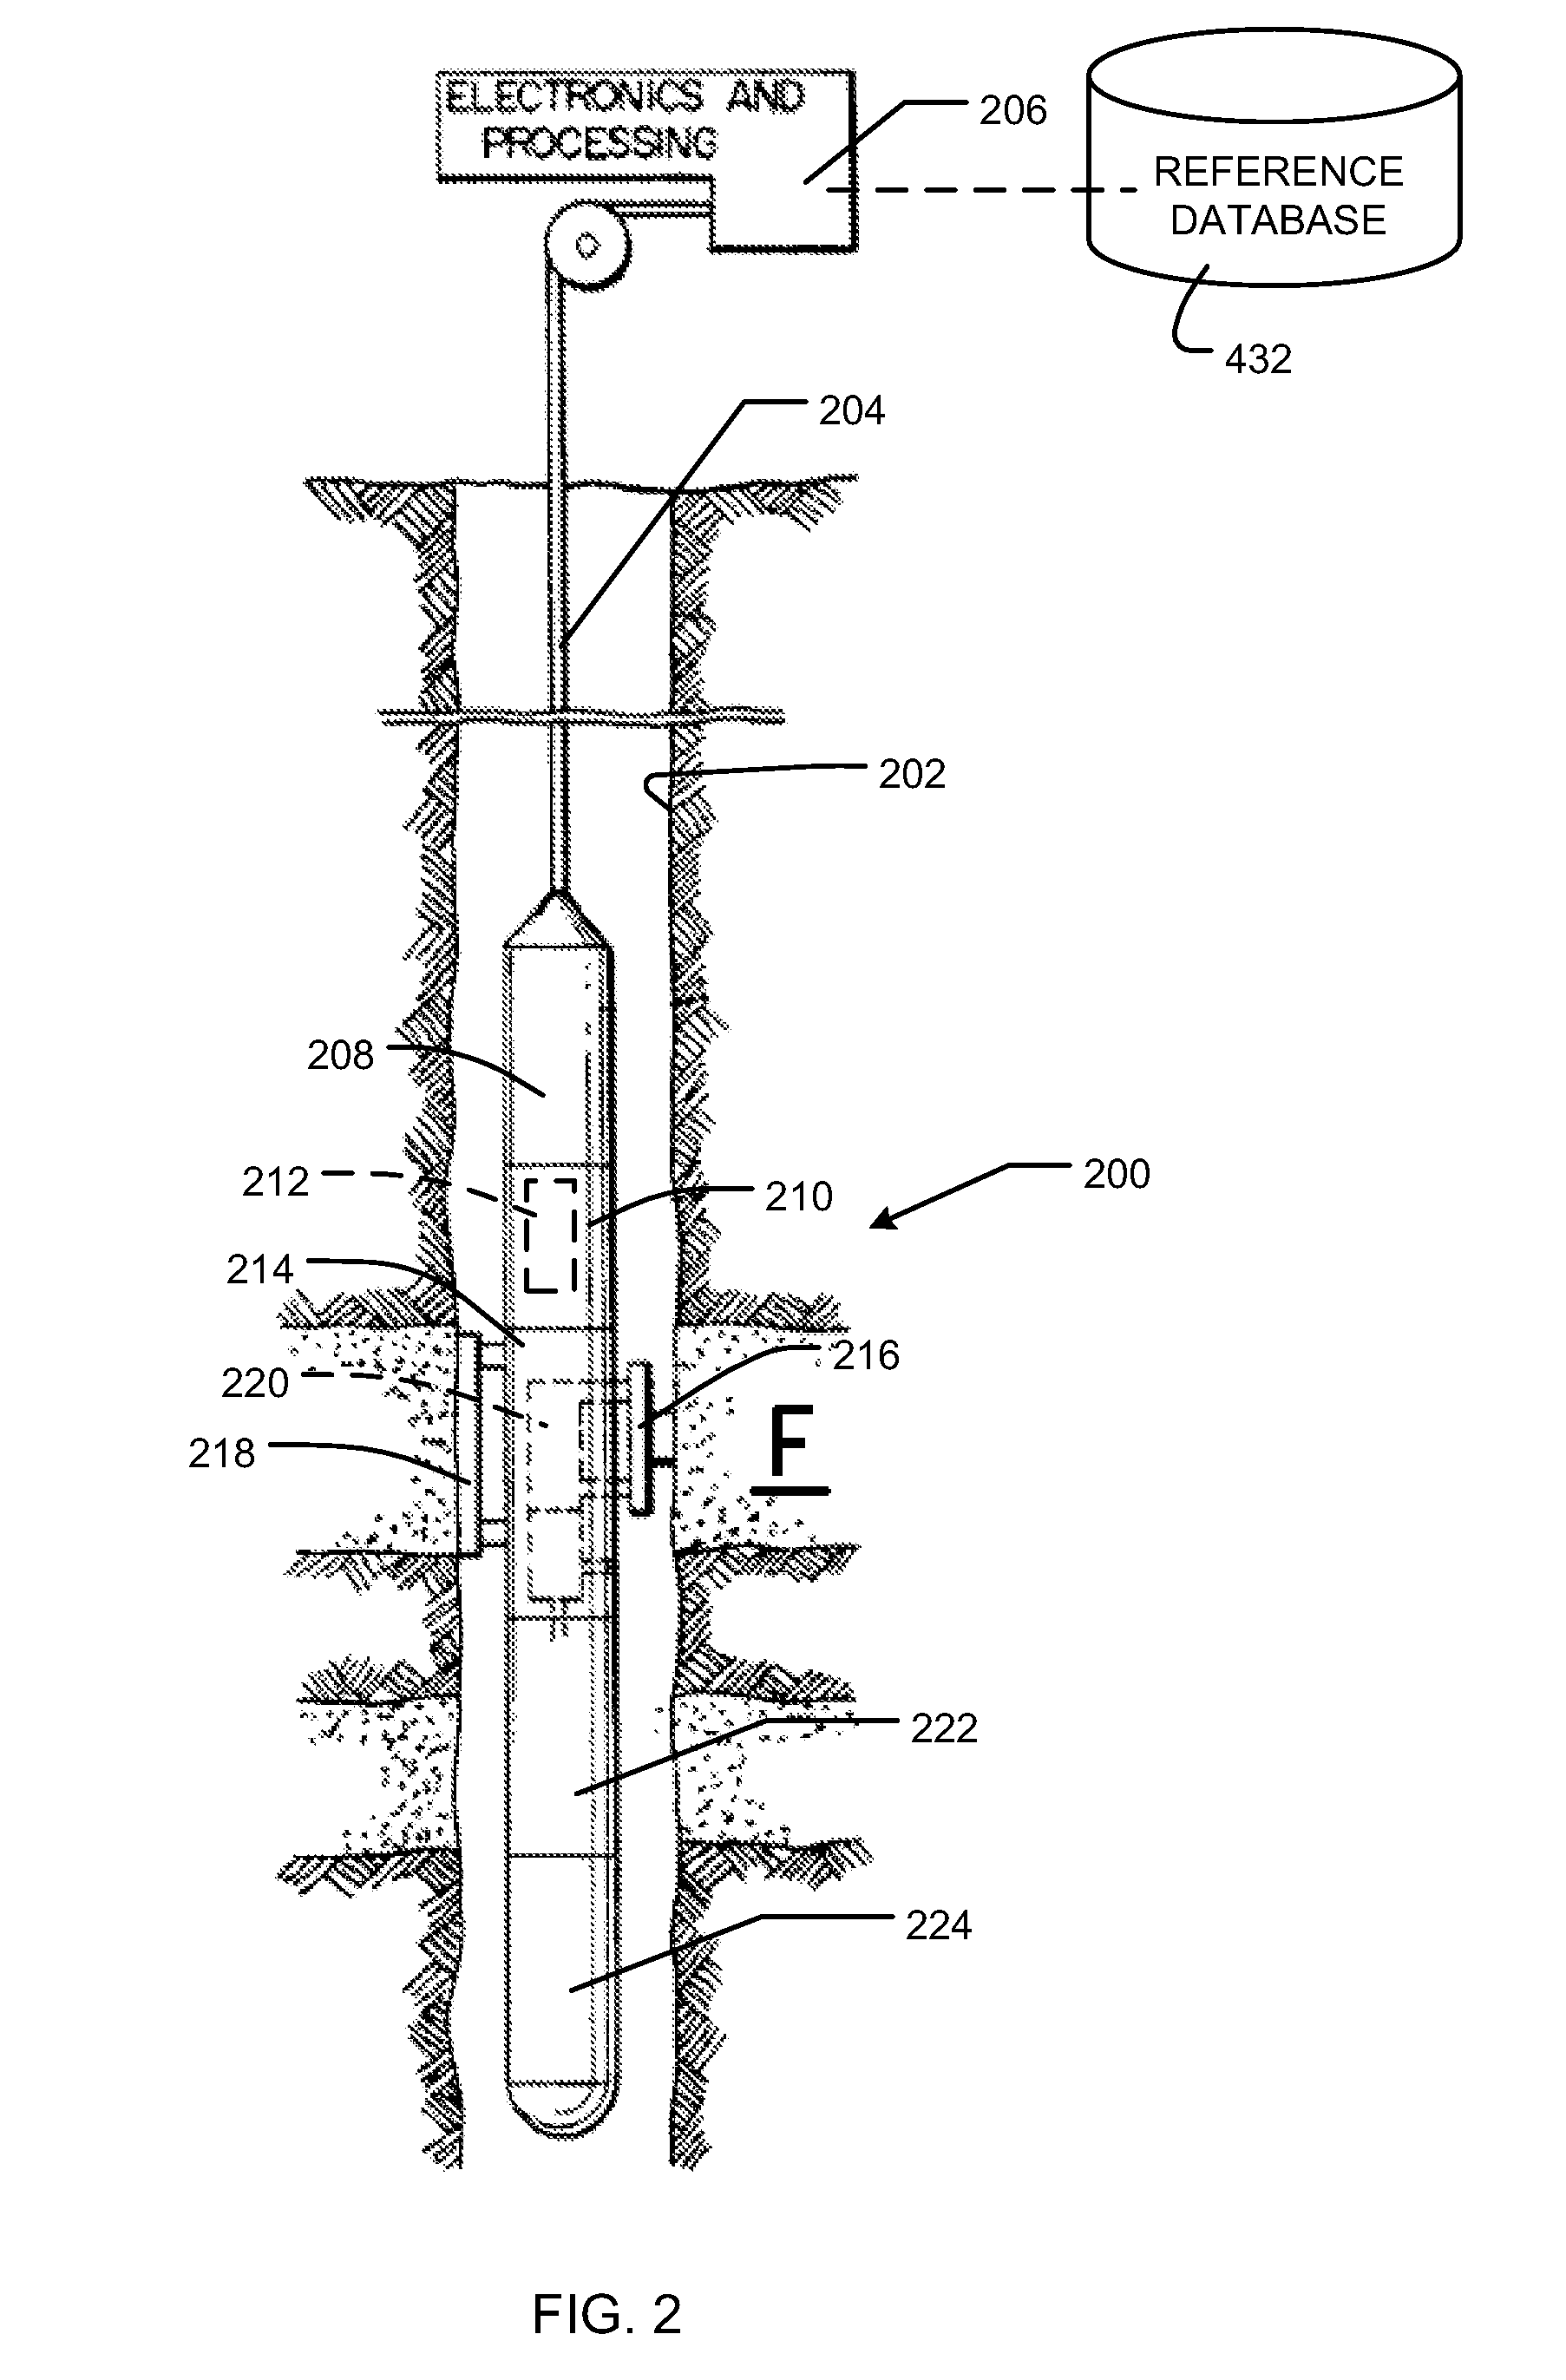 Apparatus and methods to analyze downhole fluids using ionized fluid samples